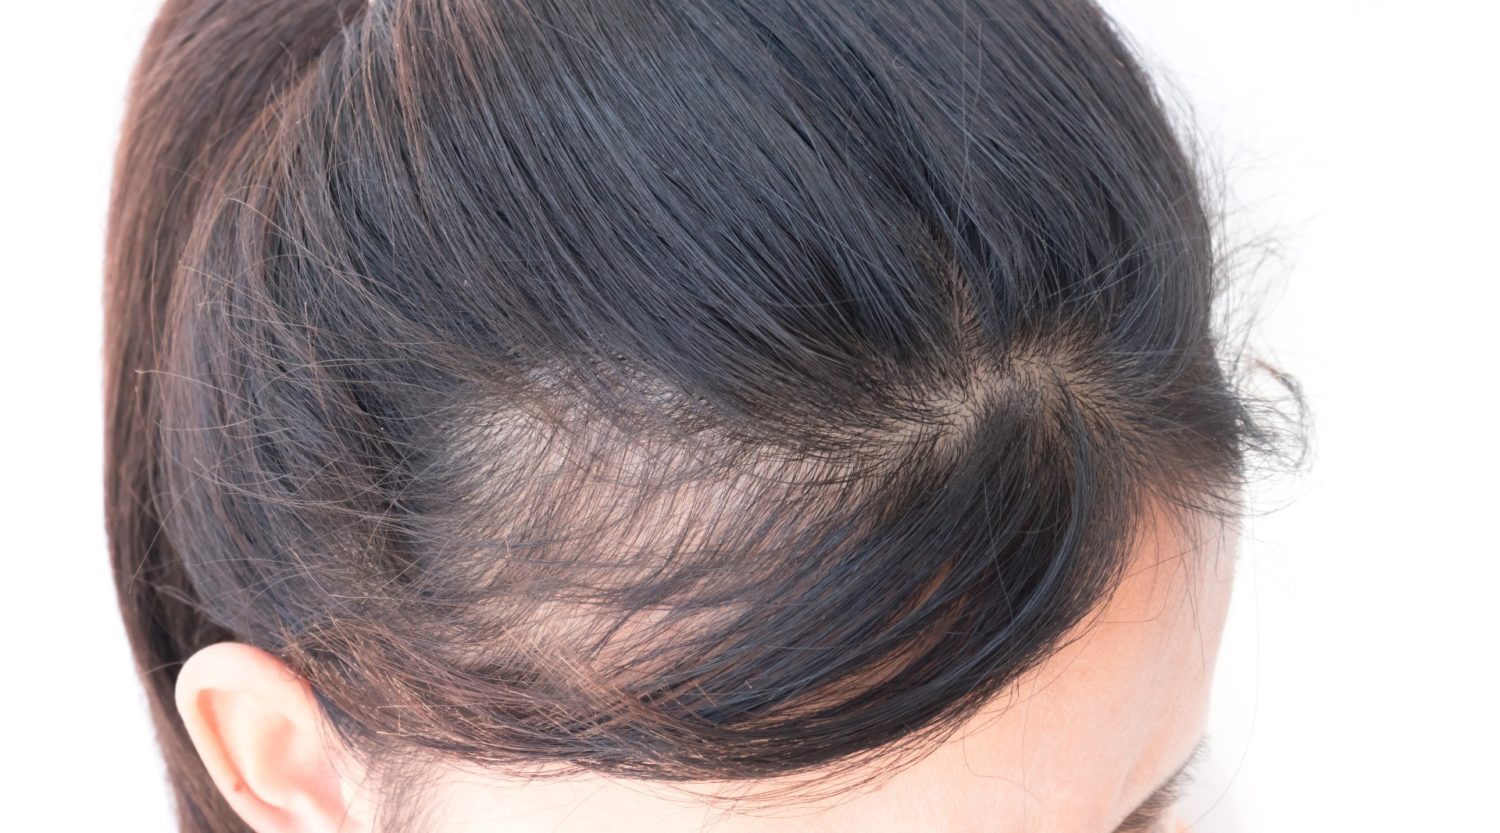 Thinning Hair And Hair Loss Could It Be Female Pattern Hair Loss